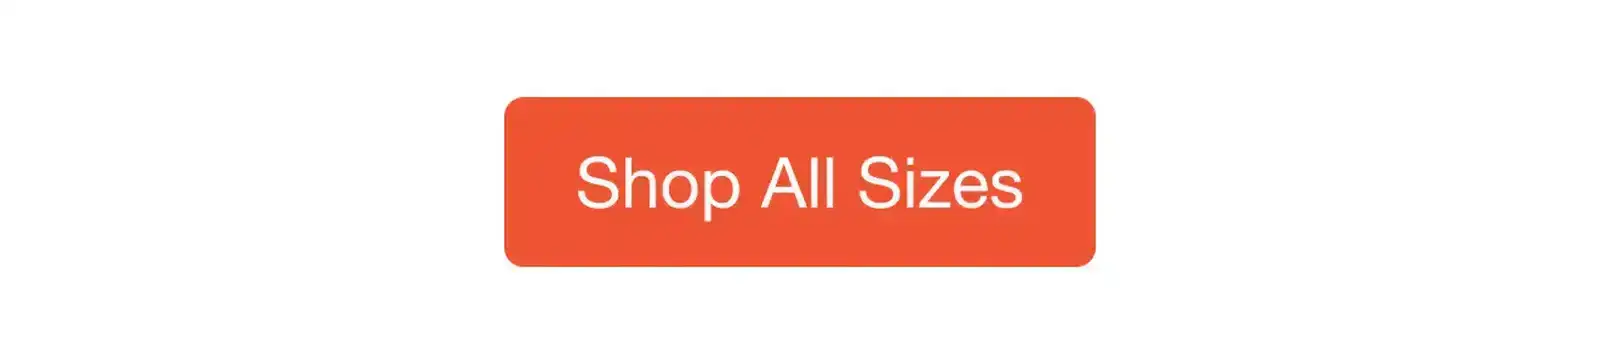 shop all sizes